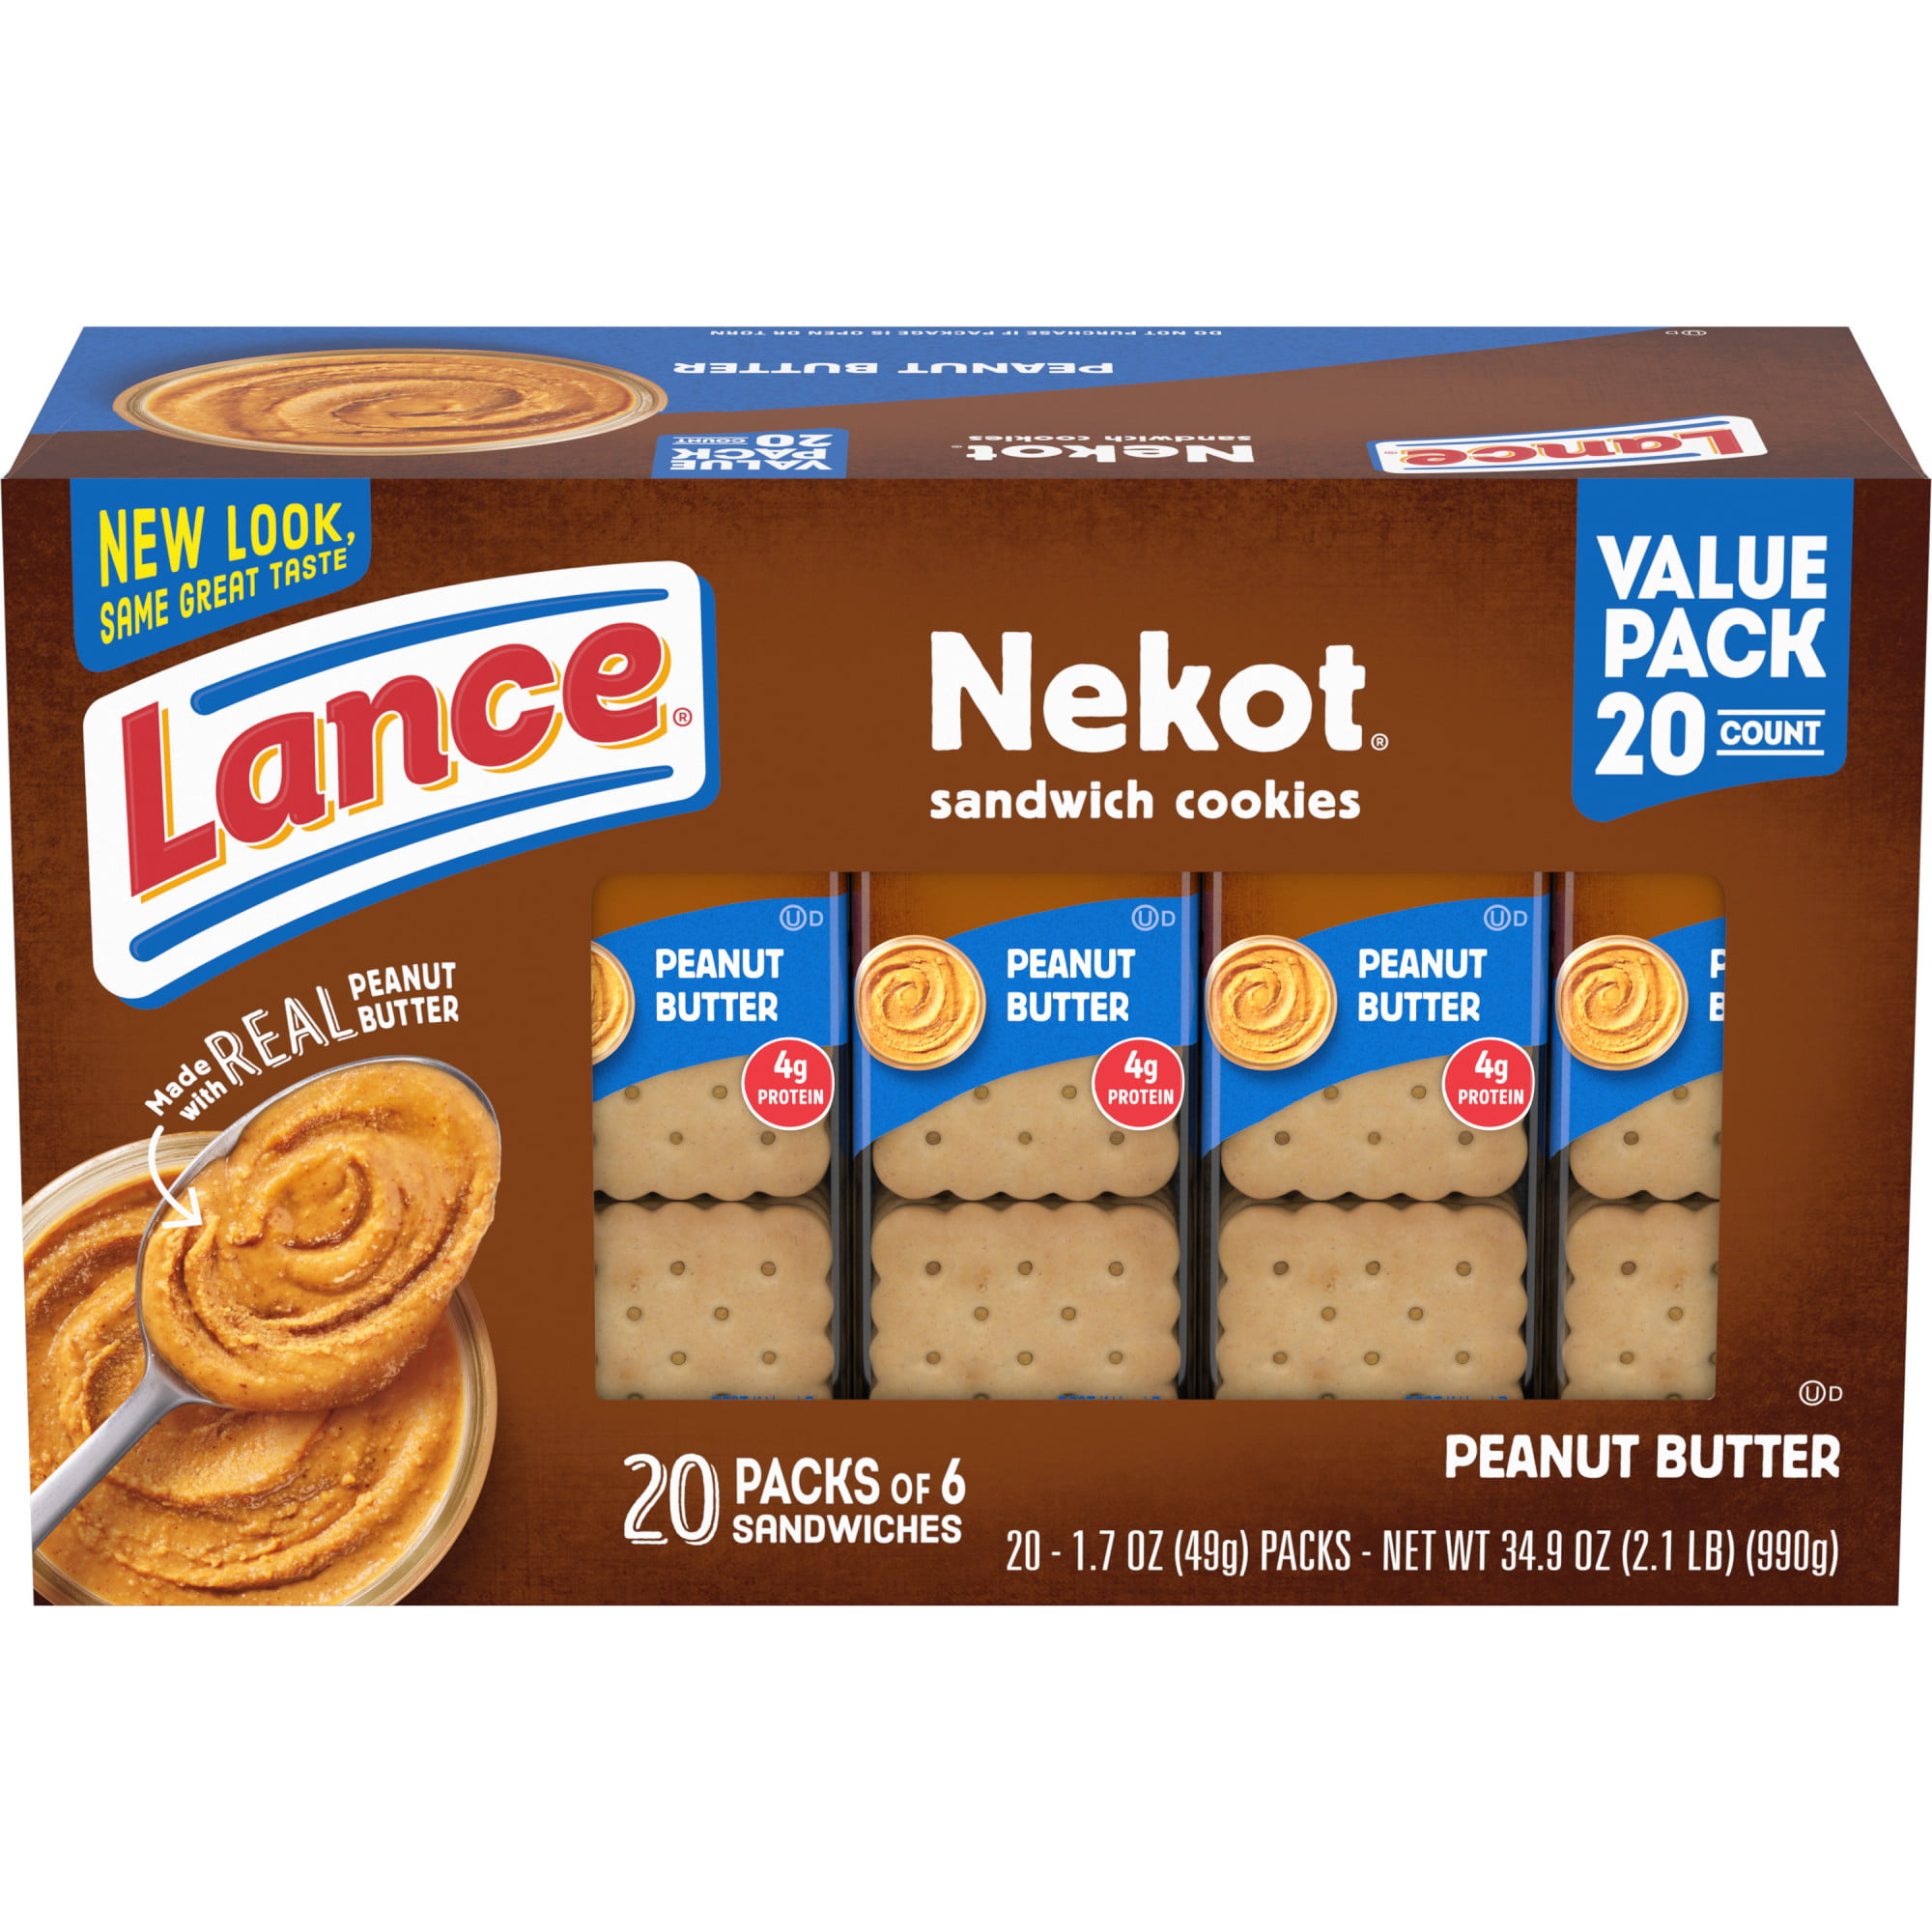 Photo 1 of *EXPIRES 03/18/23* Lance Sandwich Cookies, Nekot Peanut Butter, 20 Individually Wrapped Packs, 6 Sandwiches Each (Pack of 6)
